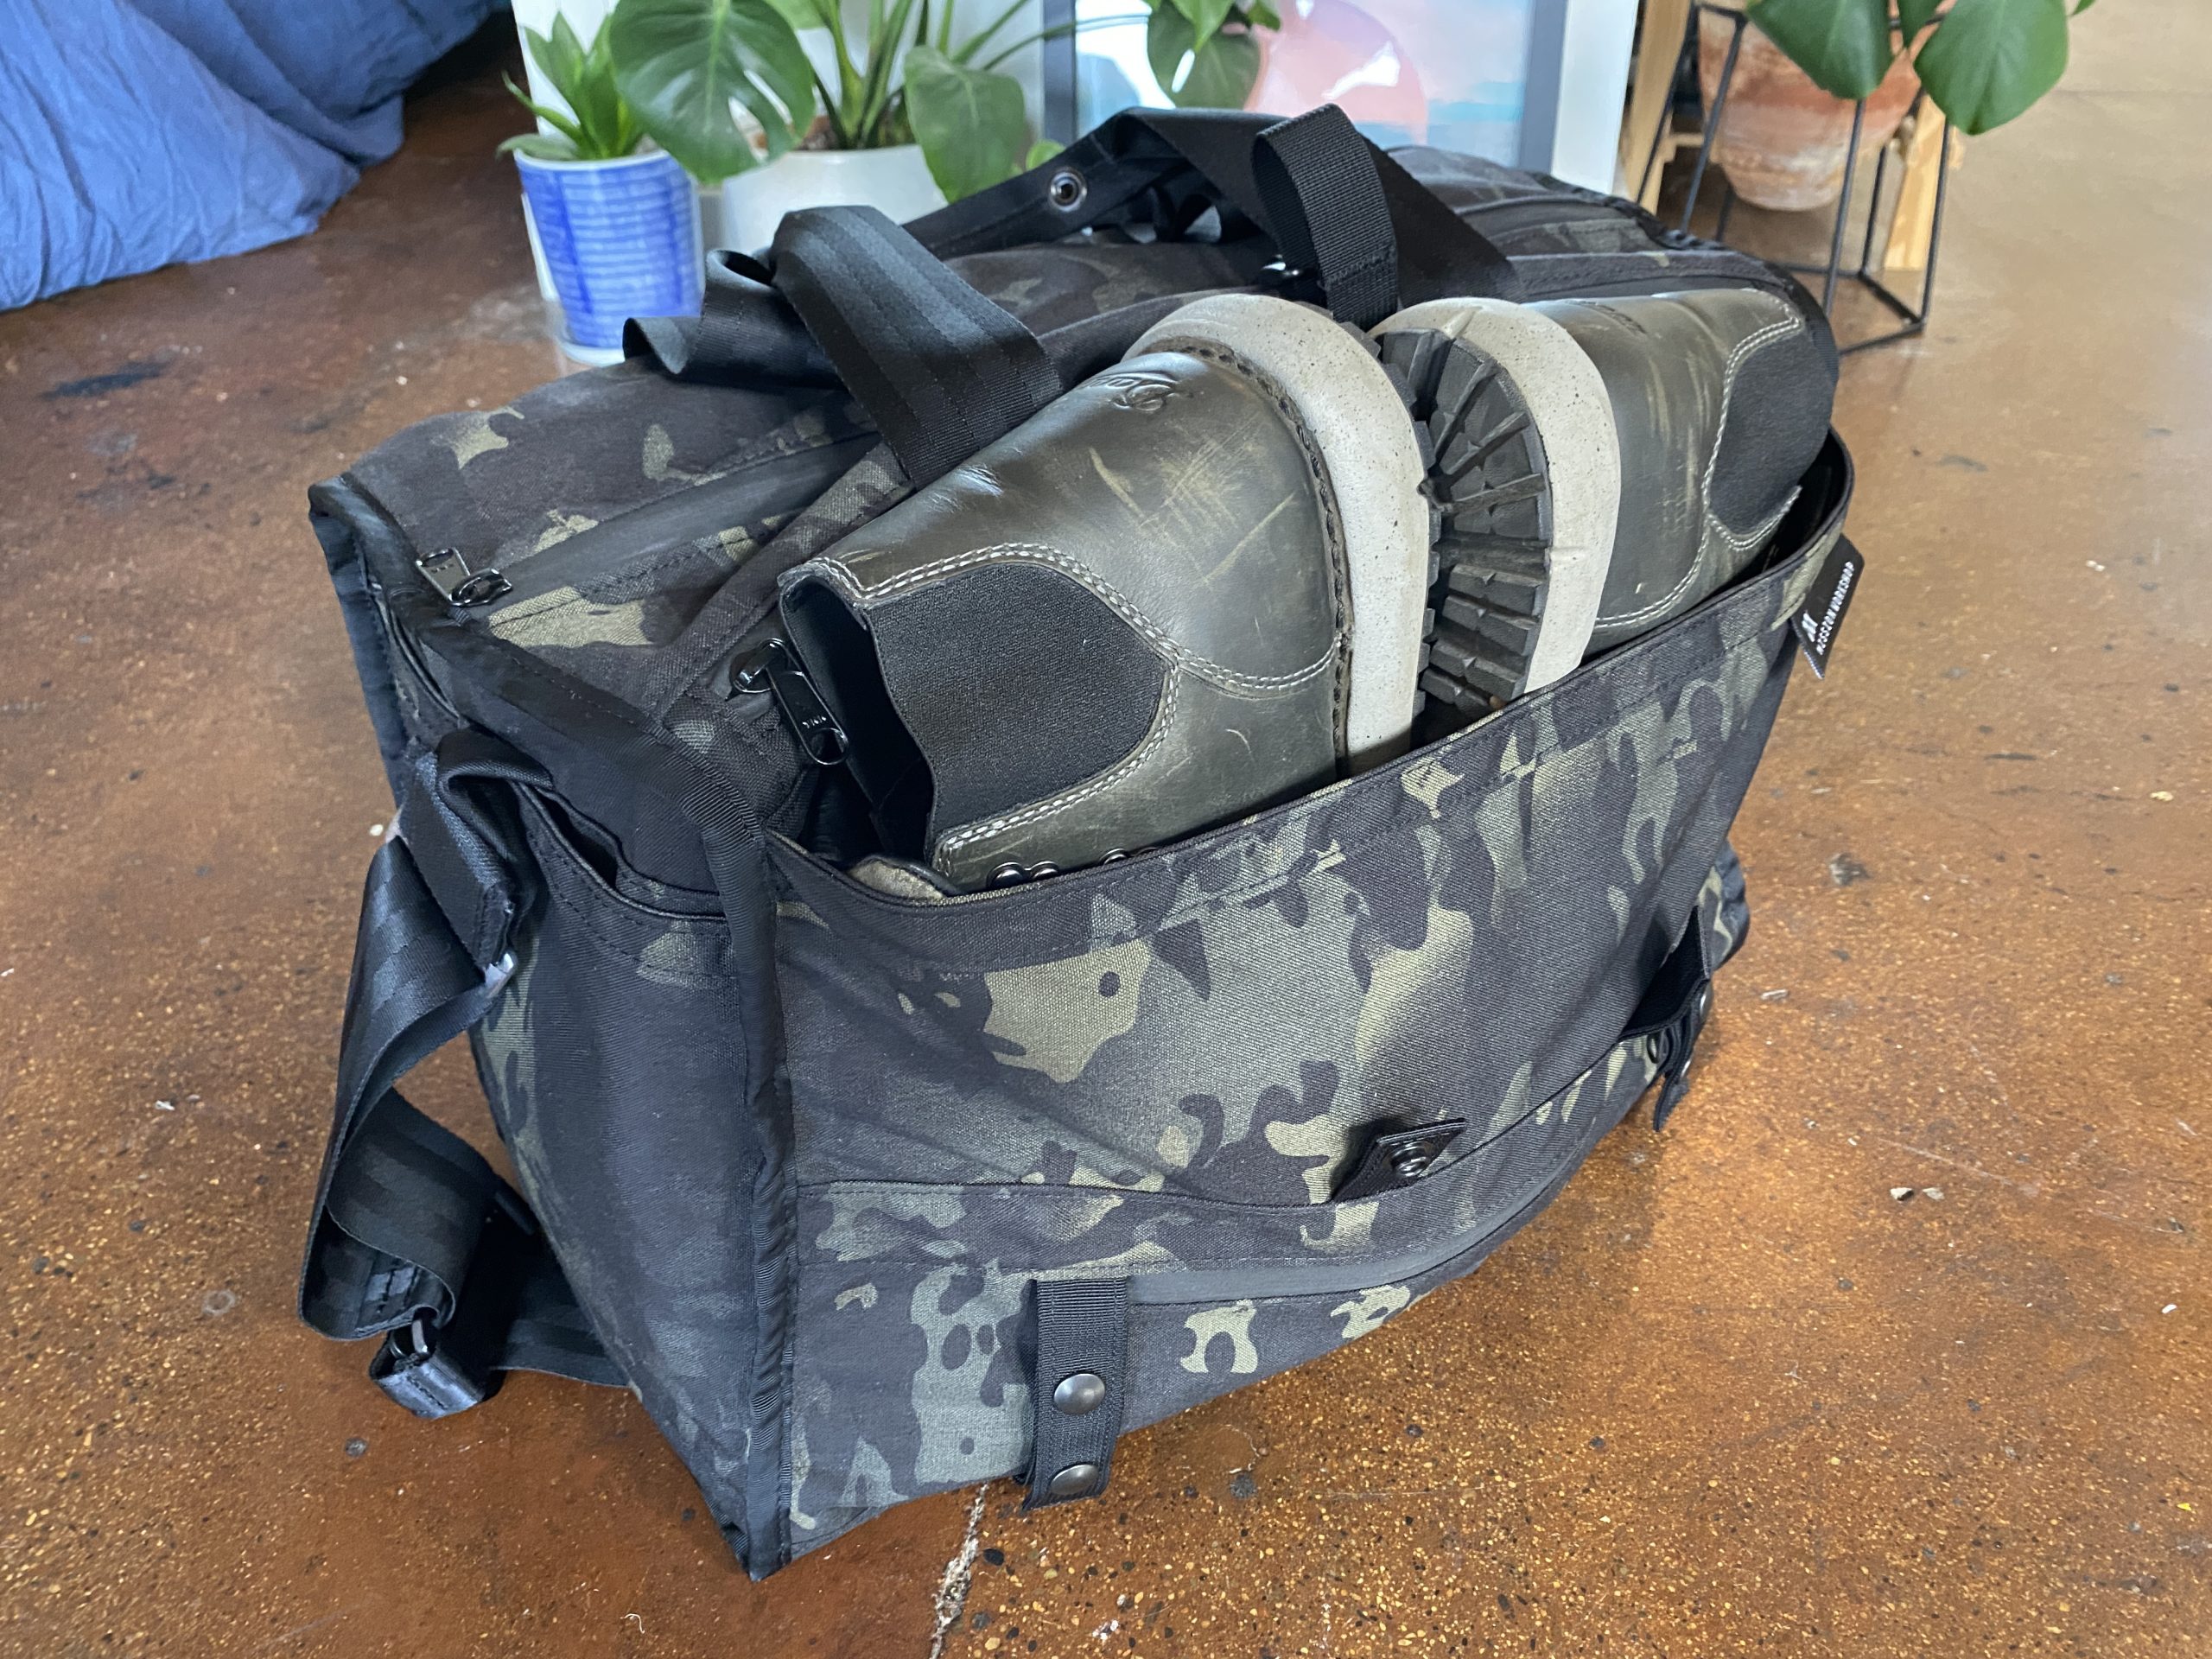 Mission Workshop Transit Duffle with boots in side pocket